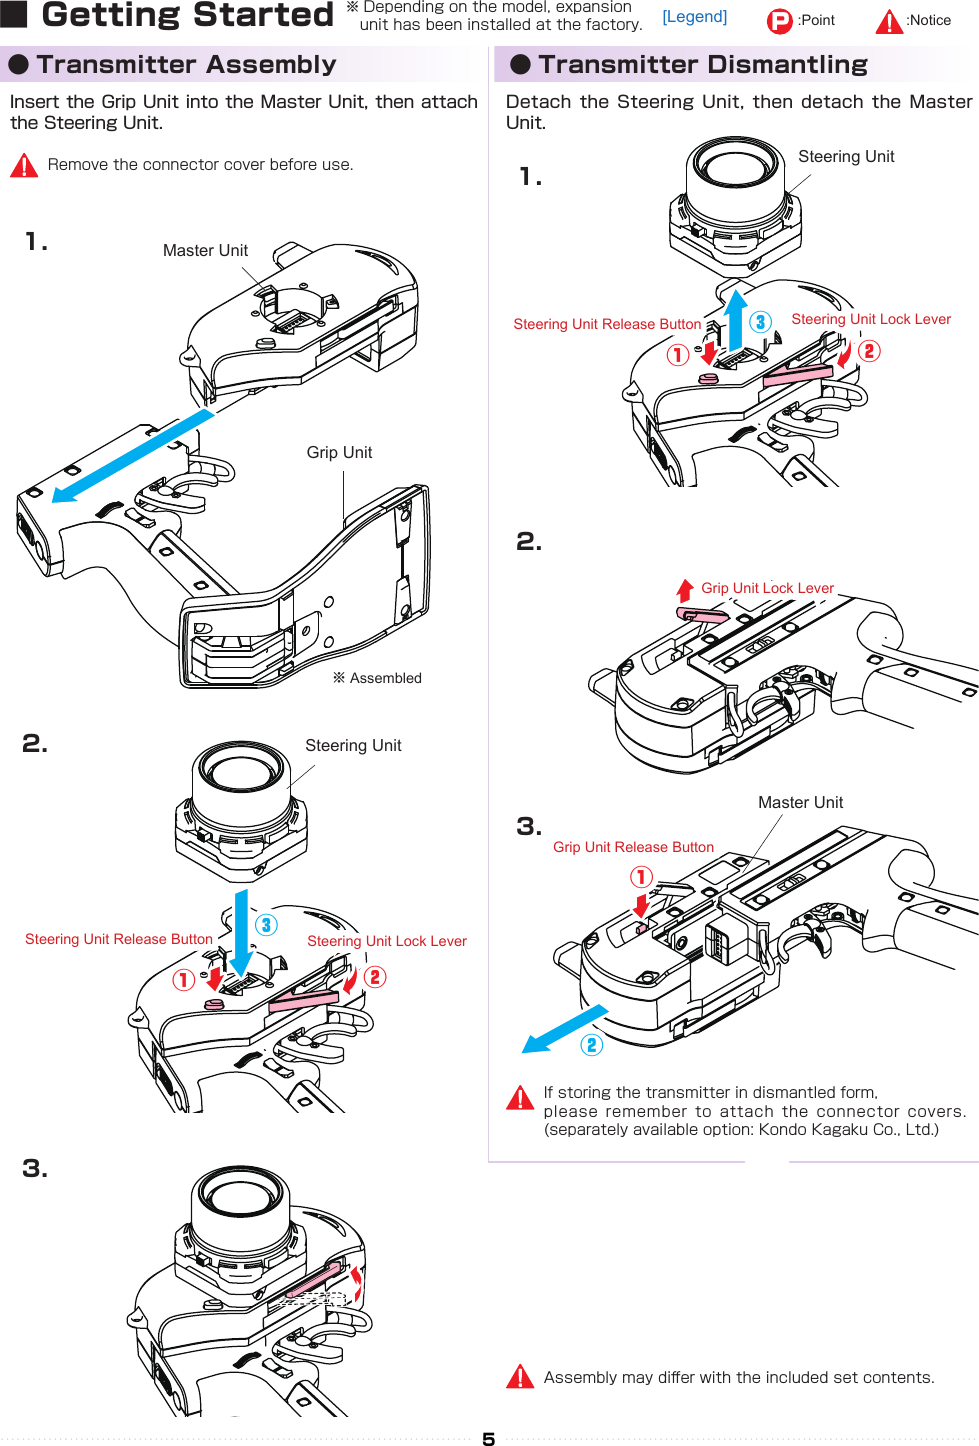 ①① ②②③③①① ②②③③①①②②5■ Getting StartedInsert the Grip Unit into the Master Unit, then attach the Steering Unit.Detach  the  Steering Unit,  then detach  the  Master Unit.● Transmitter Assembly ● Transmitter Dismantling1.1.2.2.3.3.Remove the connector cover before use.If storing the transmitter in dismantled form, please  remember  to  attach  the  connector  covers. (separately available option: Kondo Kagaku Co., Ltd.)Assembly may di󰮏er with the included set contents.[Legend] P:Point :NoticeSteering Unit Release ButtonSteering Unit Release ButtonSteering Unit Lock LeverSteering Unit Lock LeverGrip Unit Lock Lever Grip Unit Release ButtonGrip UnitMaster UnitMaster UnitSteering UnitSteering Unit※Assembled※ Depending on the model, expansion 　unit has been installed at the factory.